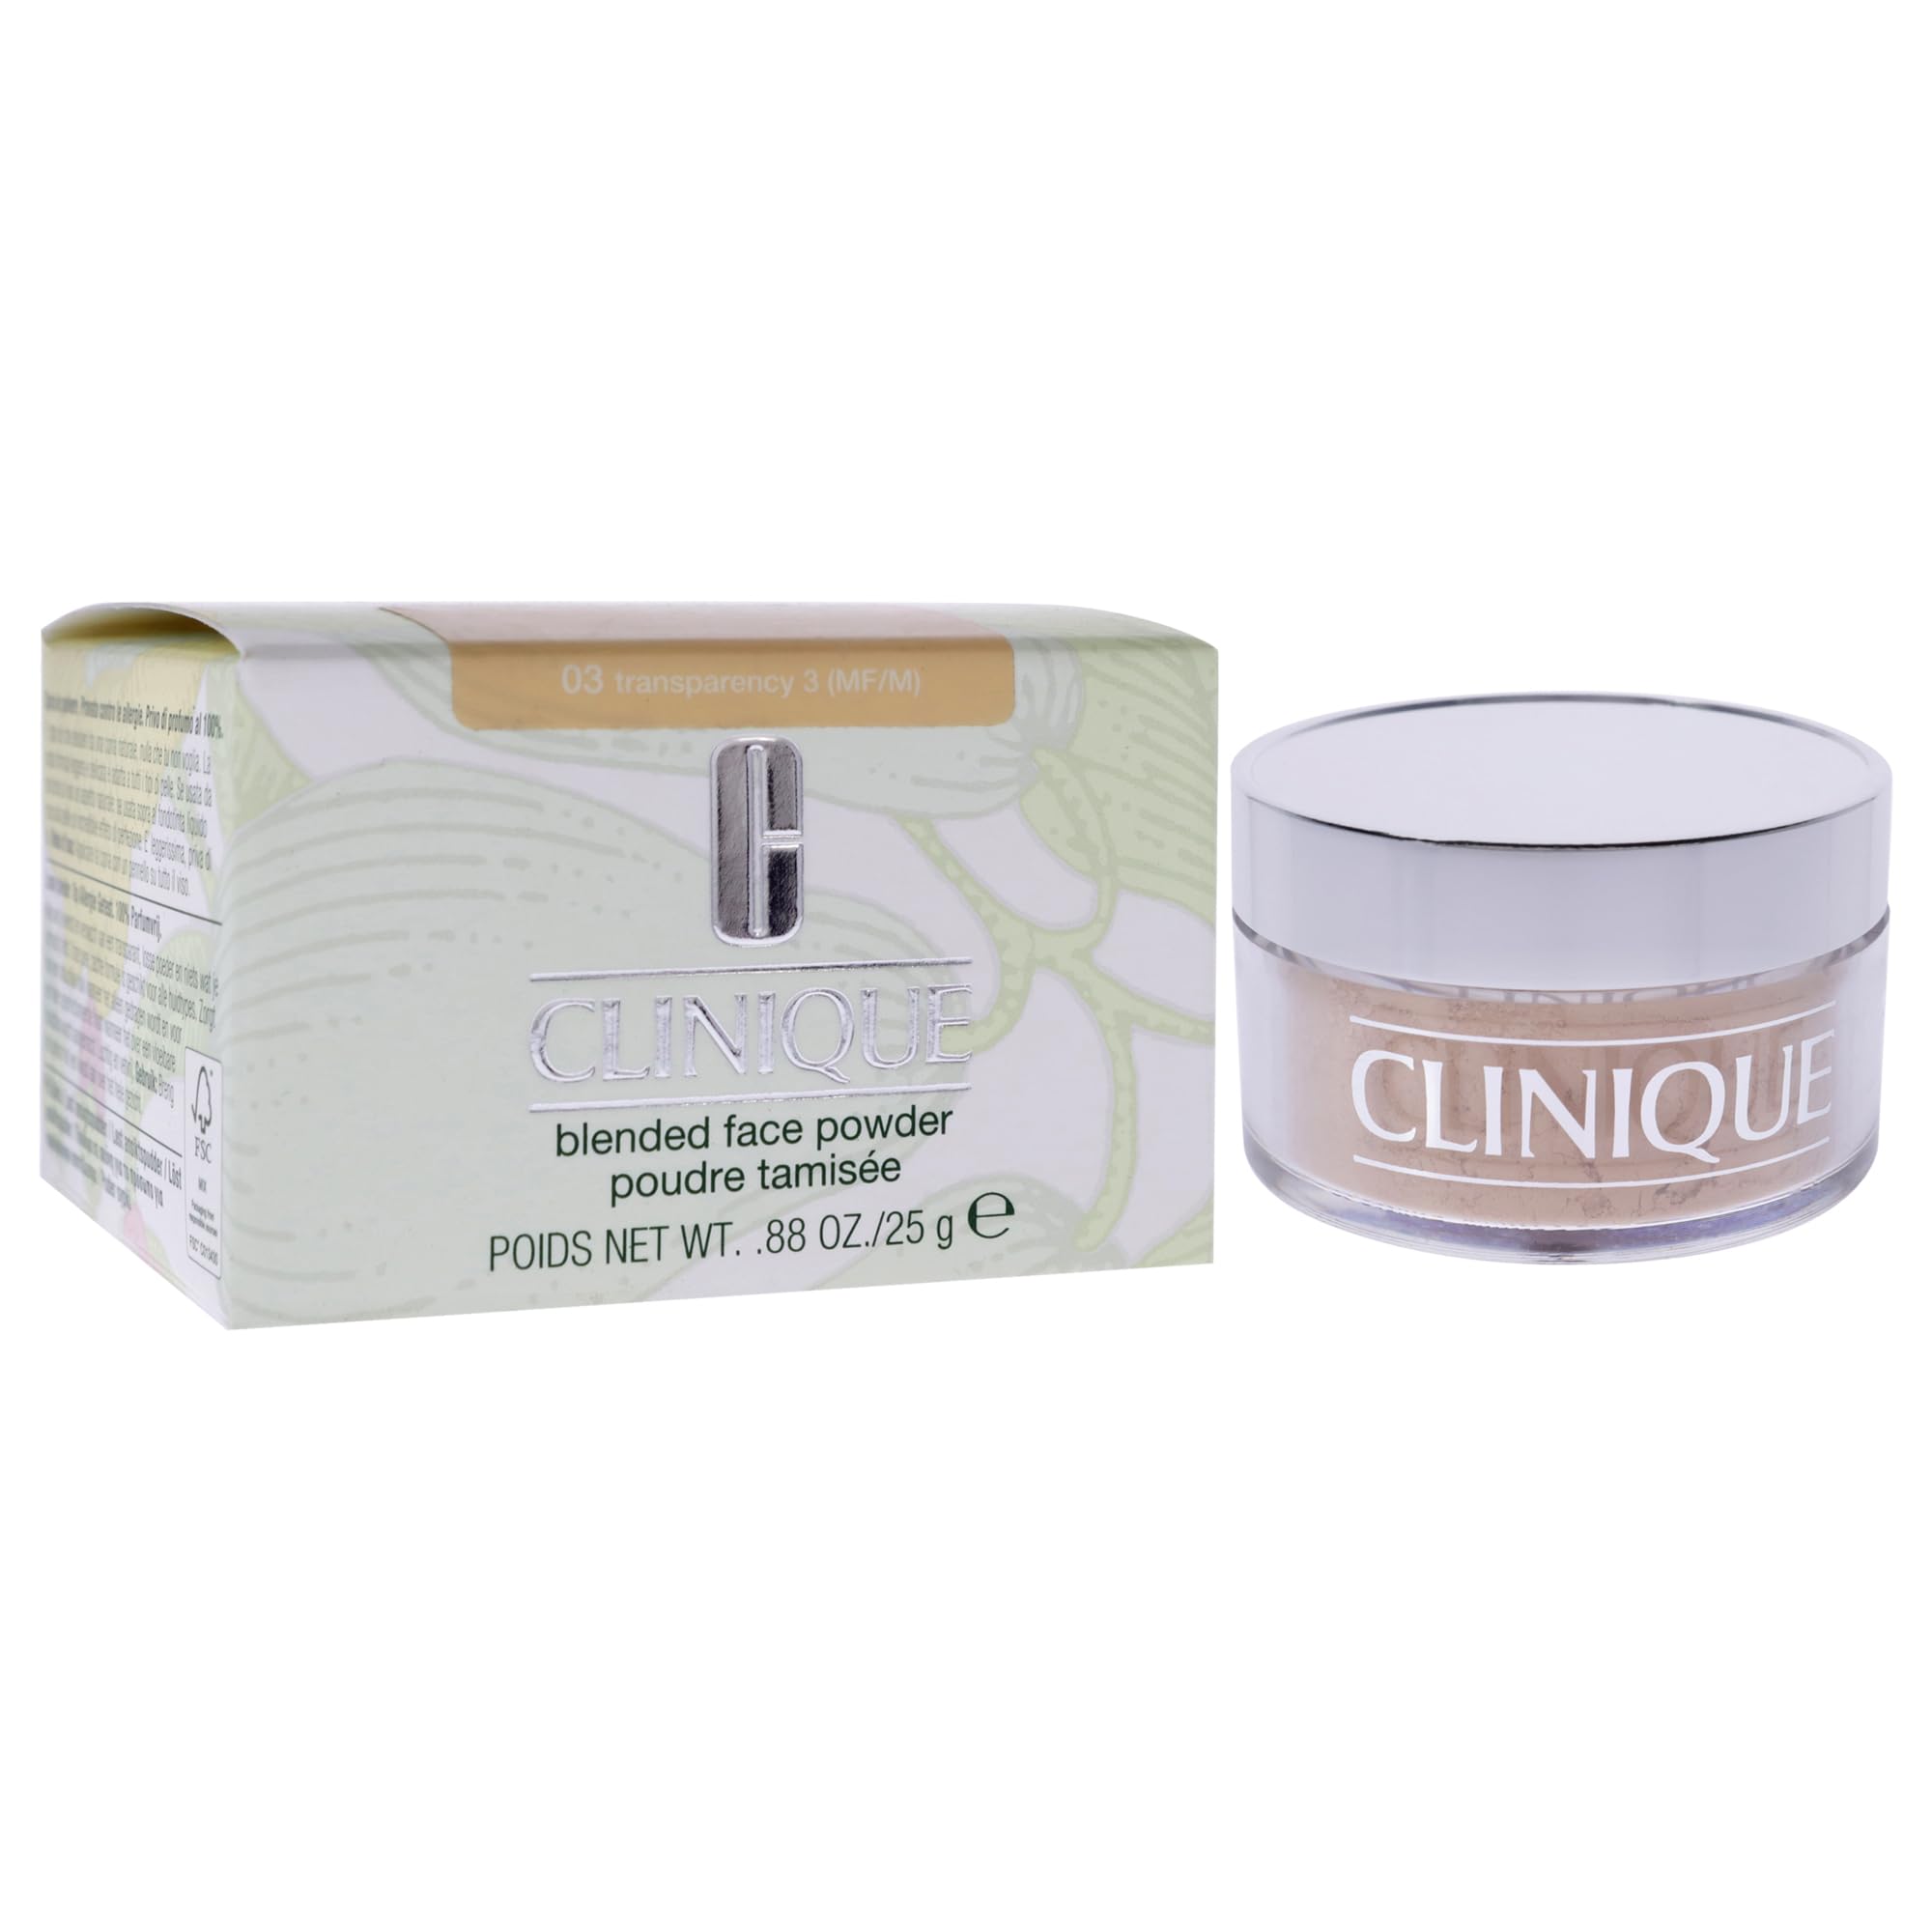 Blended Face Powder- 03 Transparency by Clinique for Women - 0.88 oz Powder